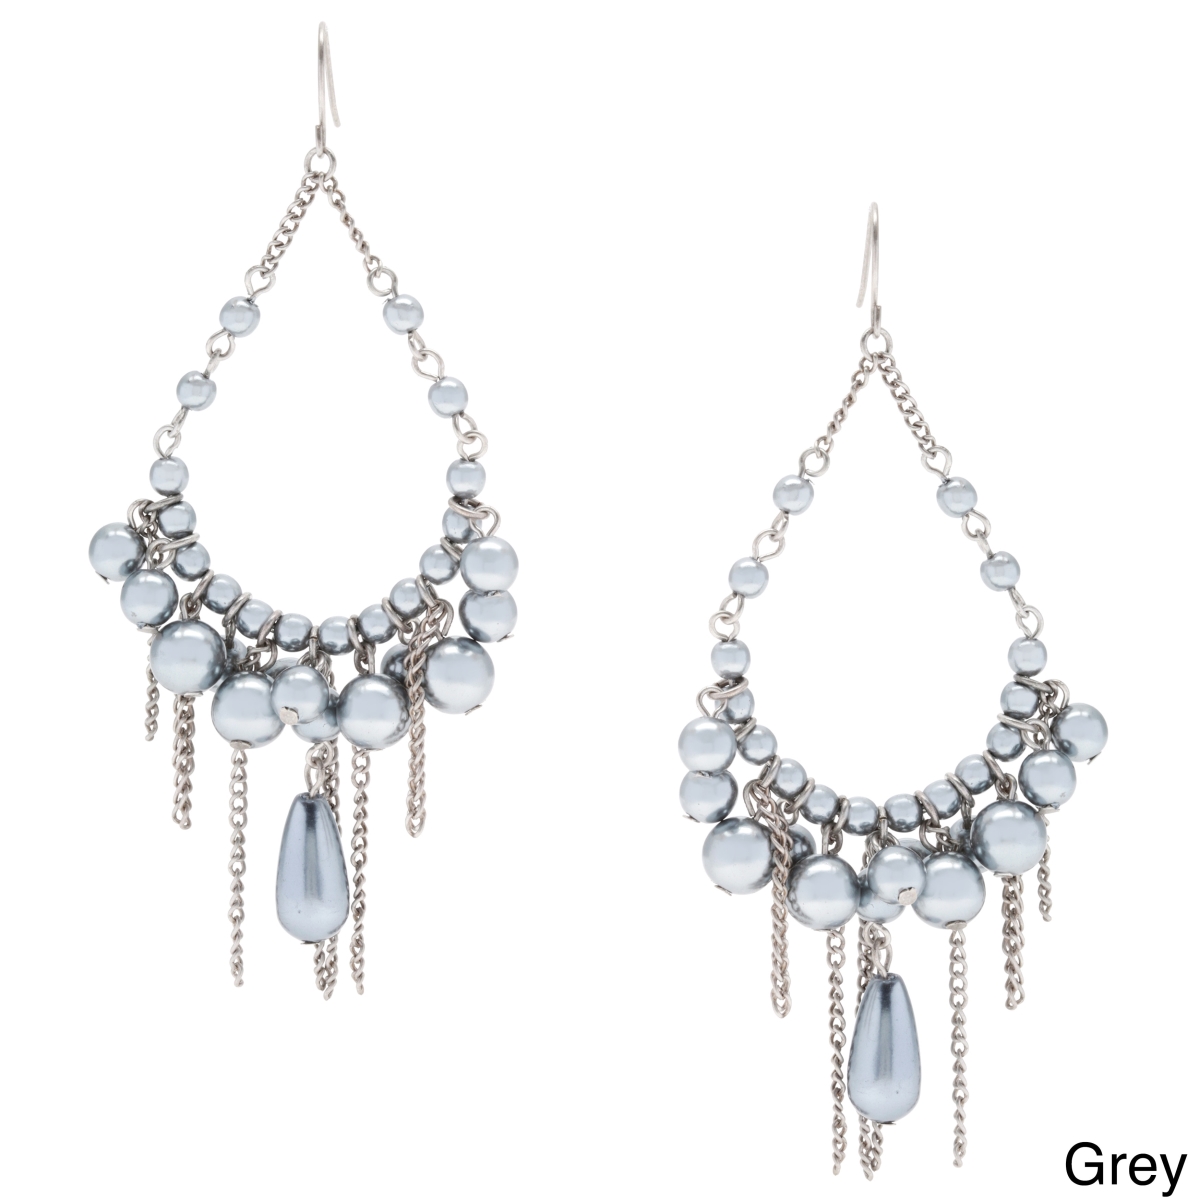 Picture of Alexa Starr 3612-EP-GREY Faux Pearl Chandelier Earrings with Burnished Chain Fringe